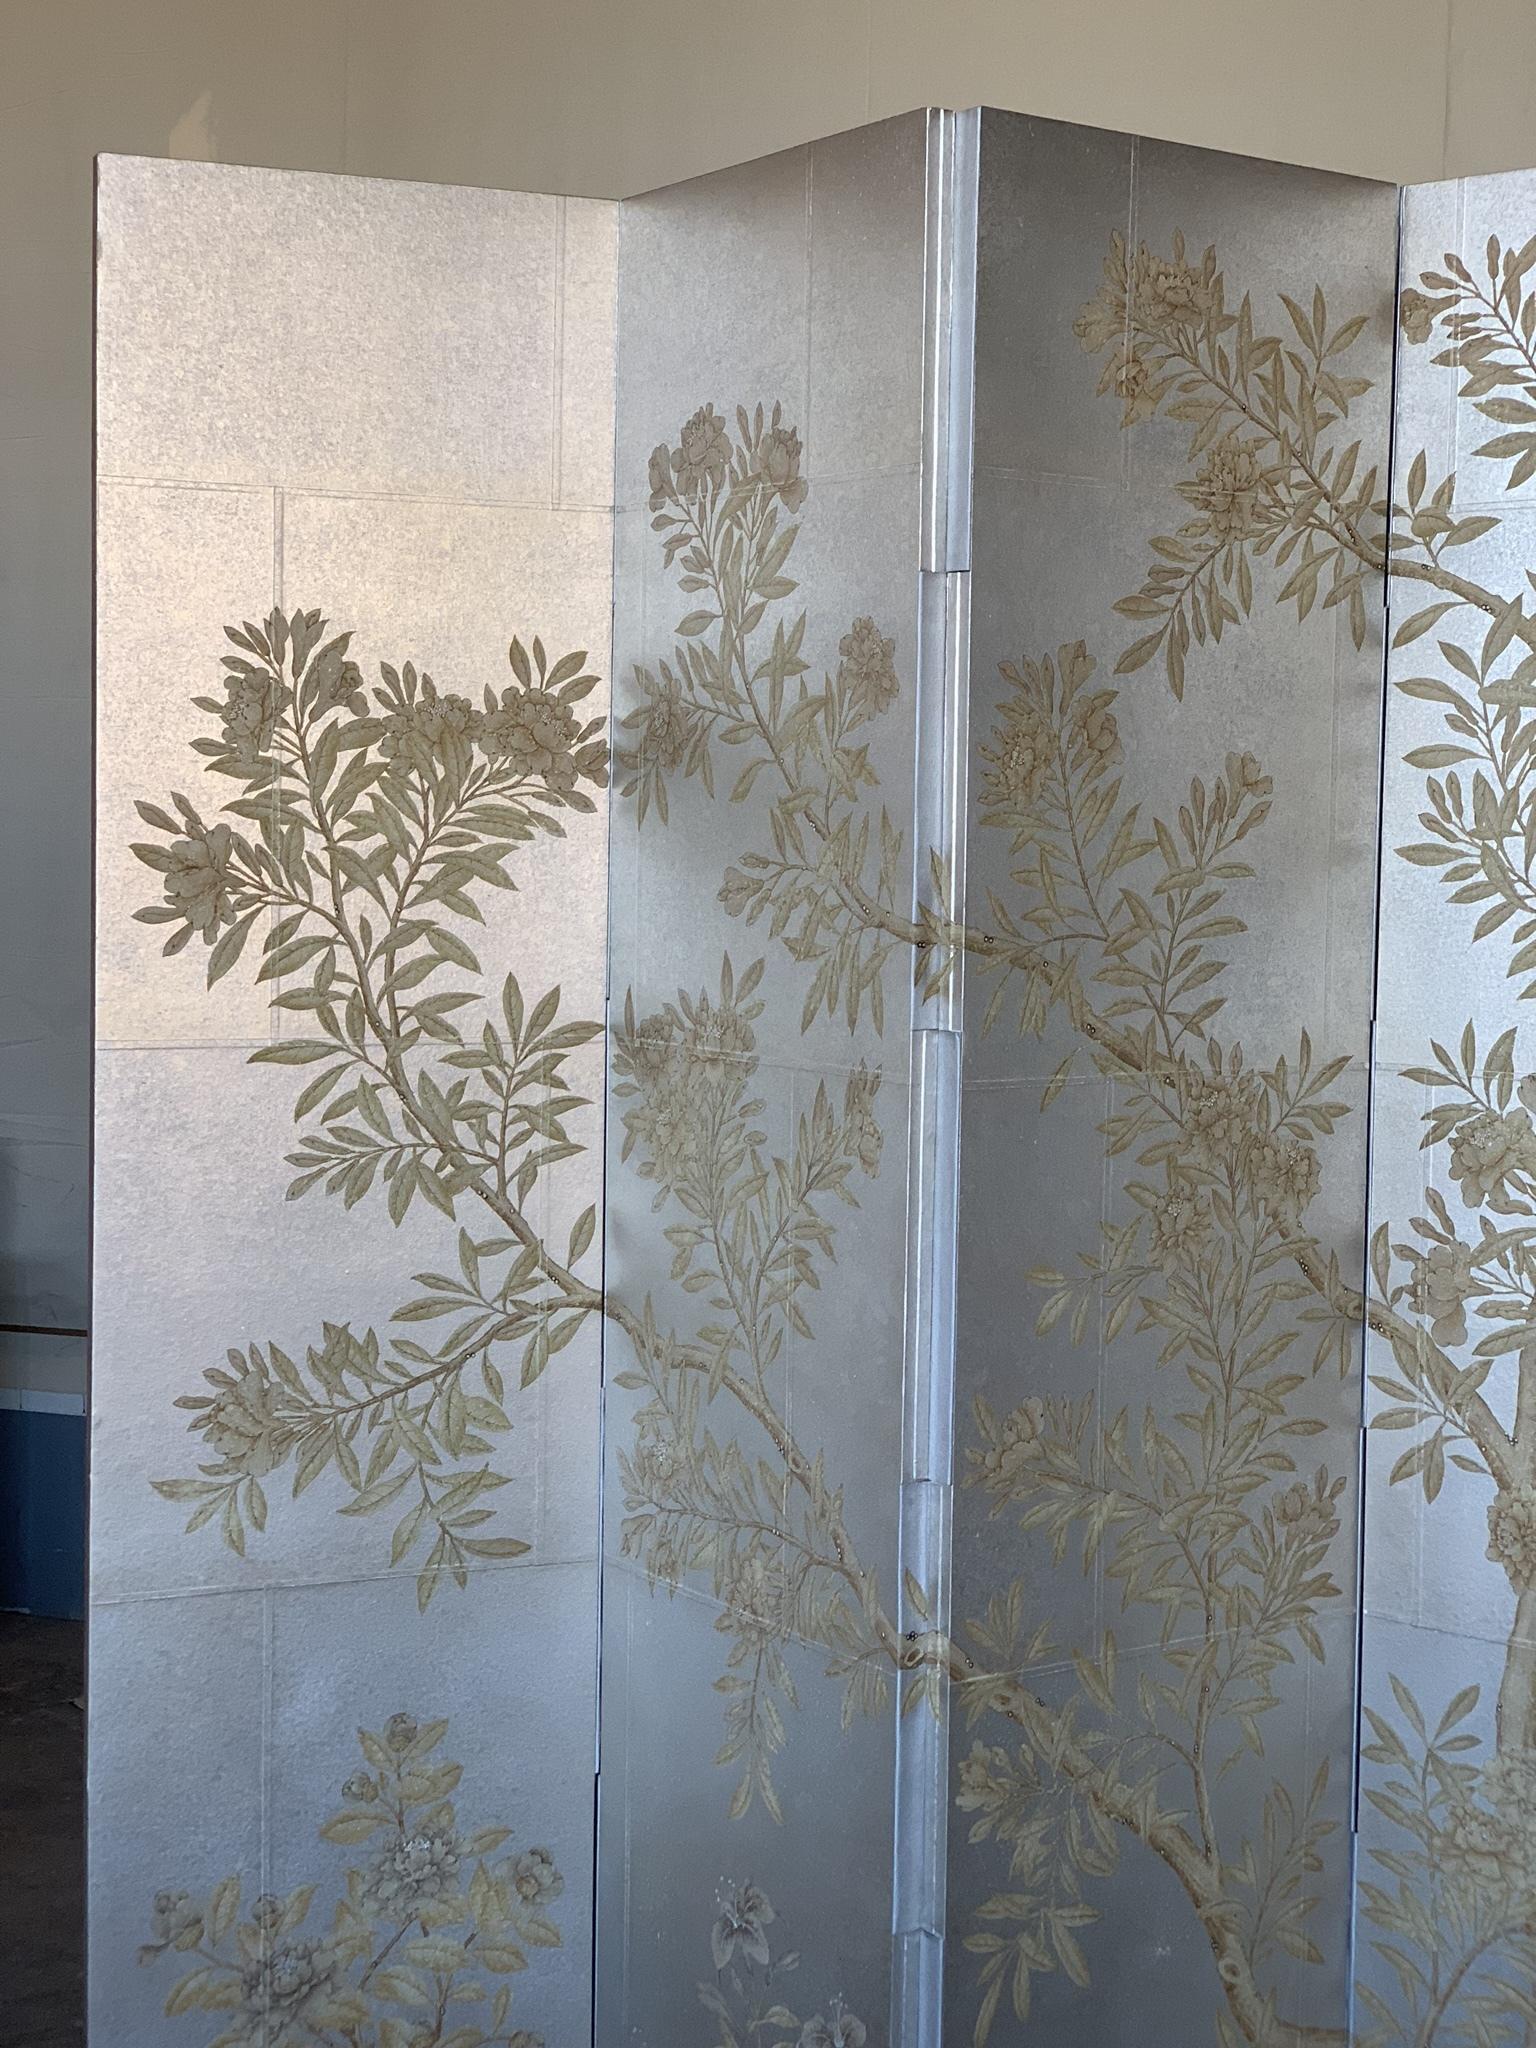 A beautiful vintage screen hand painted by Gracie, with our Sepia Garden design on the front, and a lattice design on the back.

The screen has French hinges, and the design is hand painted between each panel. Each panel is 18